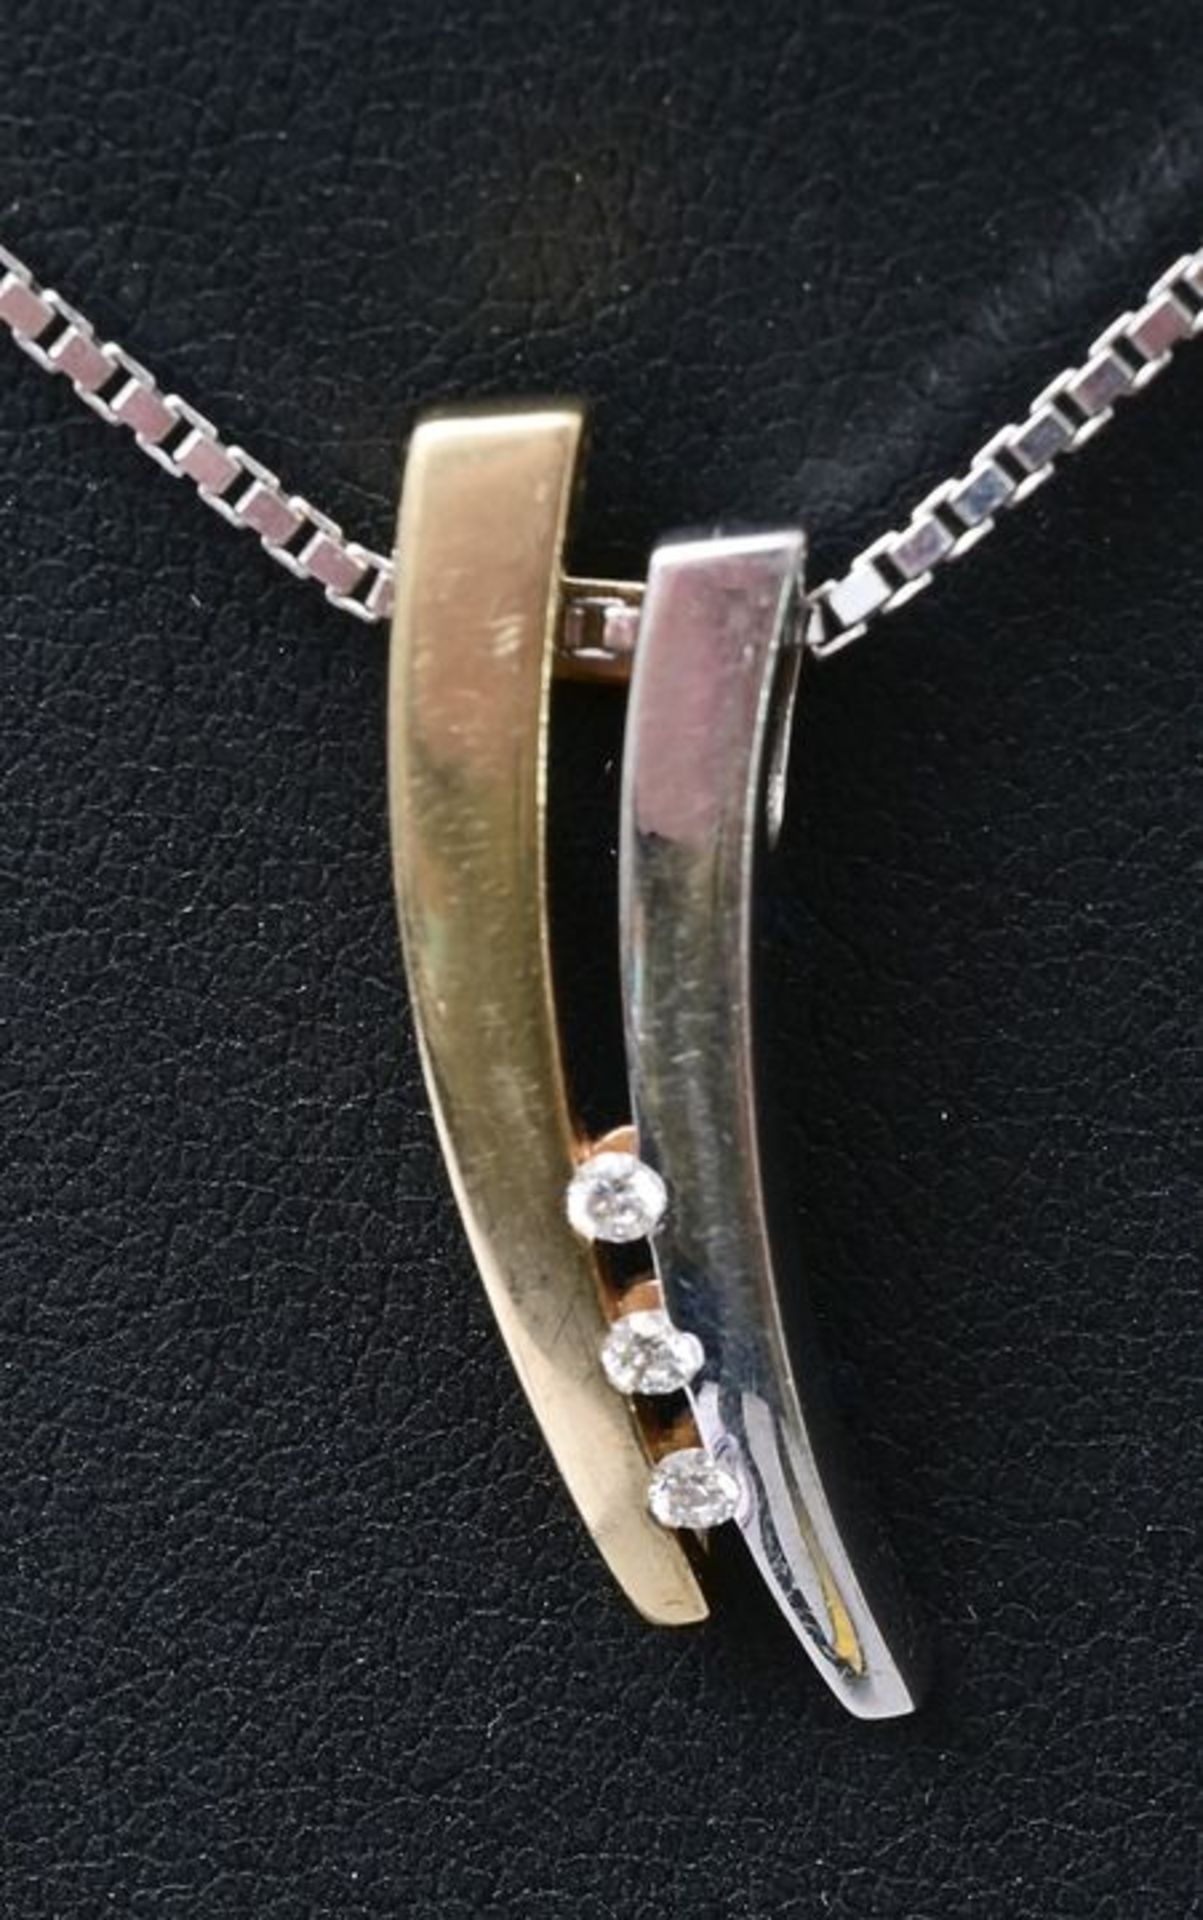 Kette mit Anhänger/ necklace with pendant